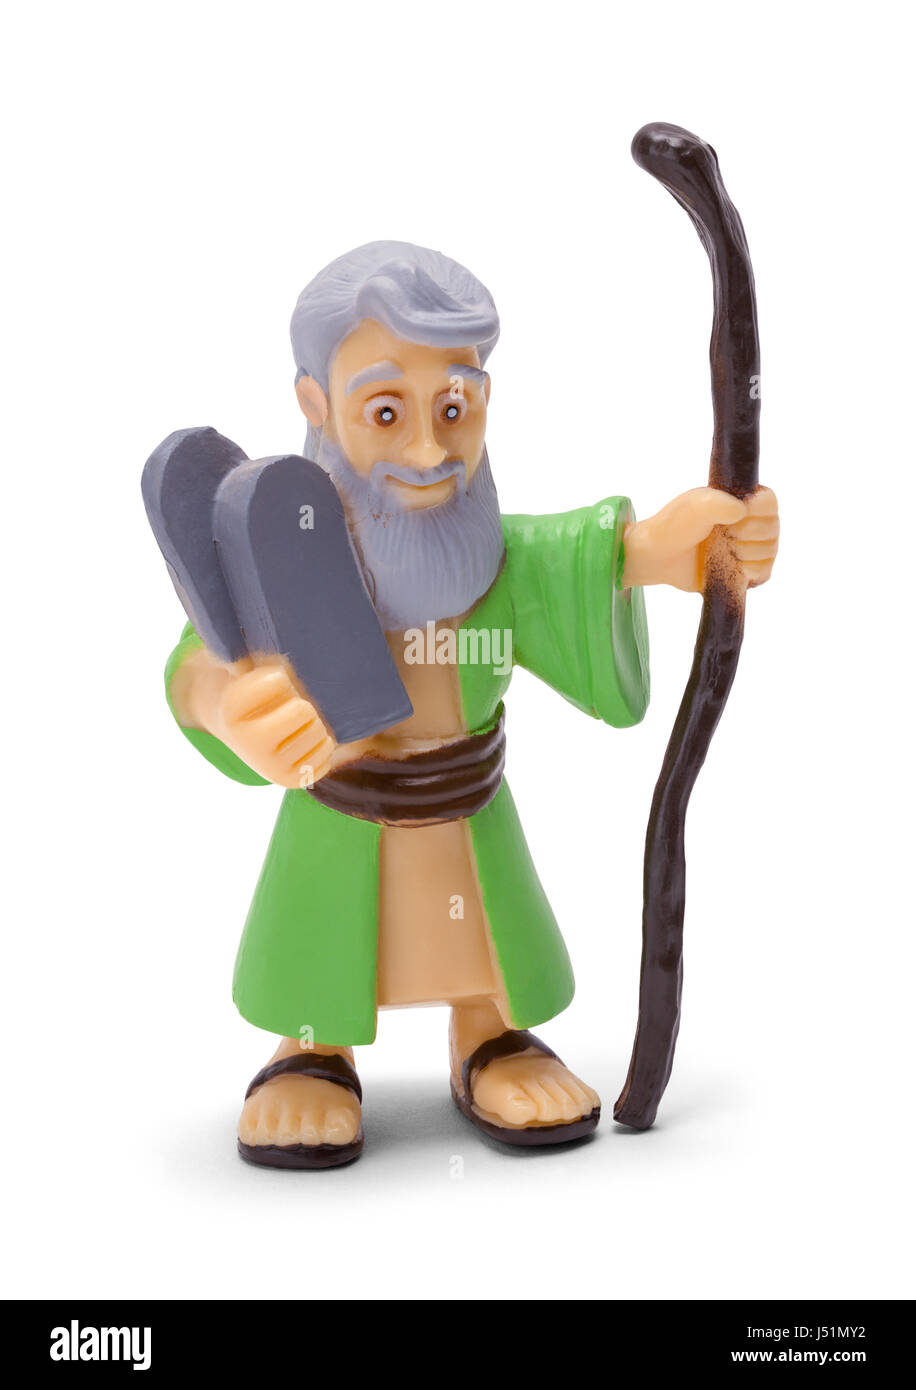 Moses Holding Ten Commandments Toy Isolated on White Background. Stock Photo